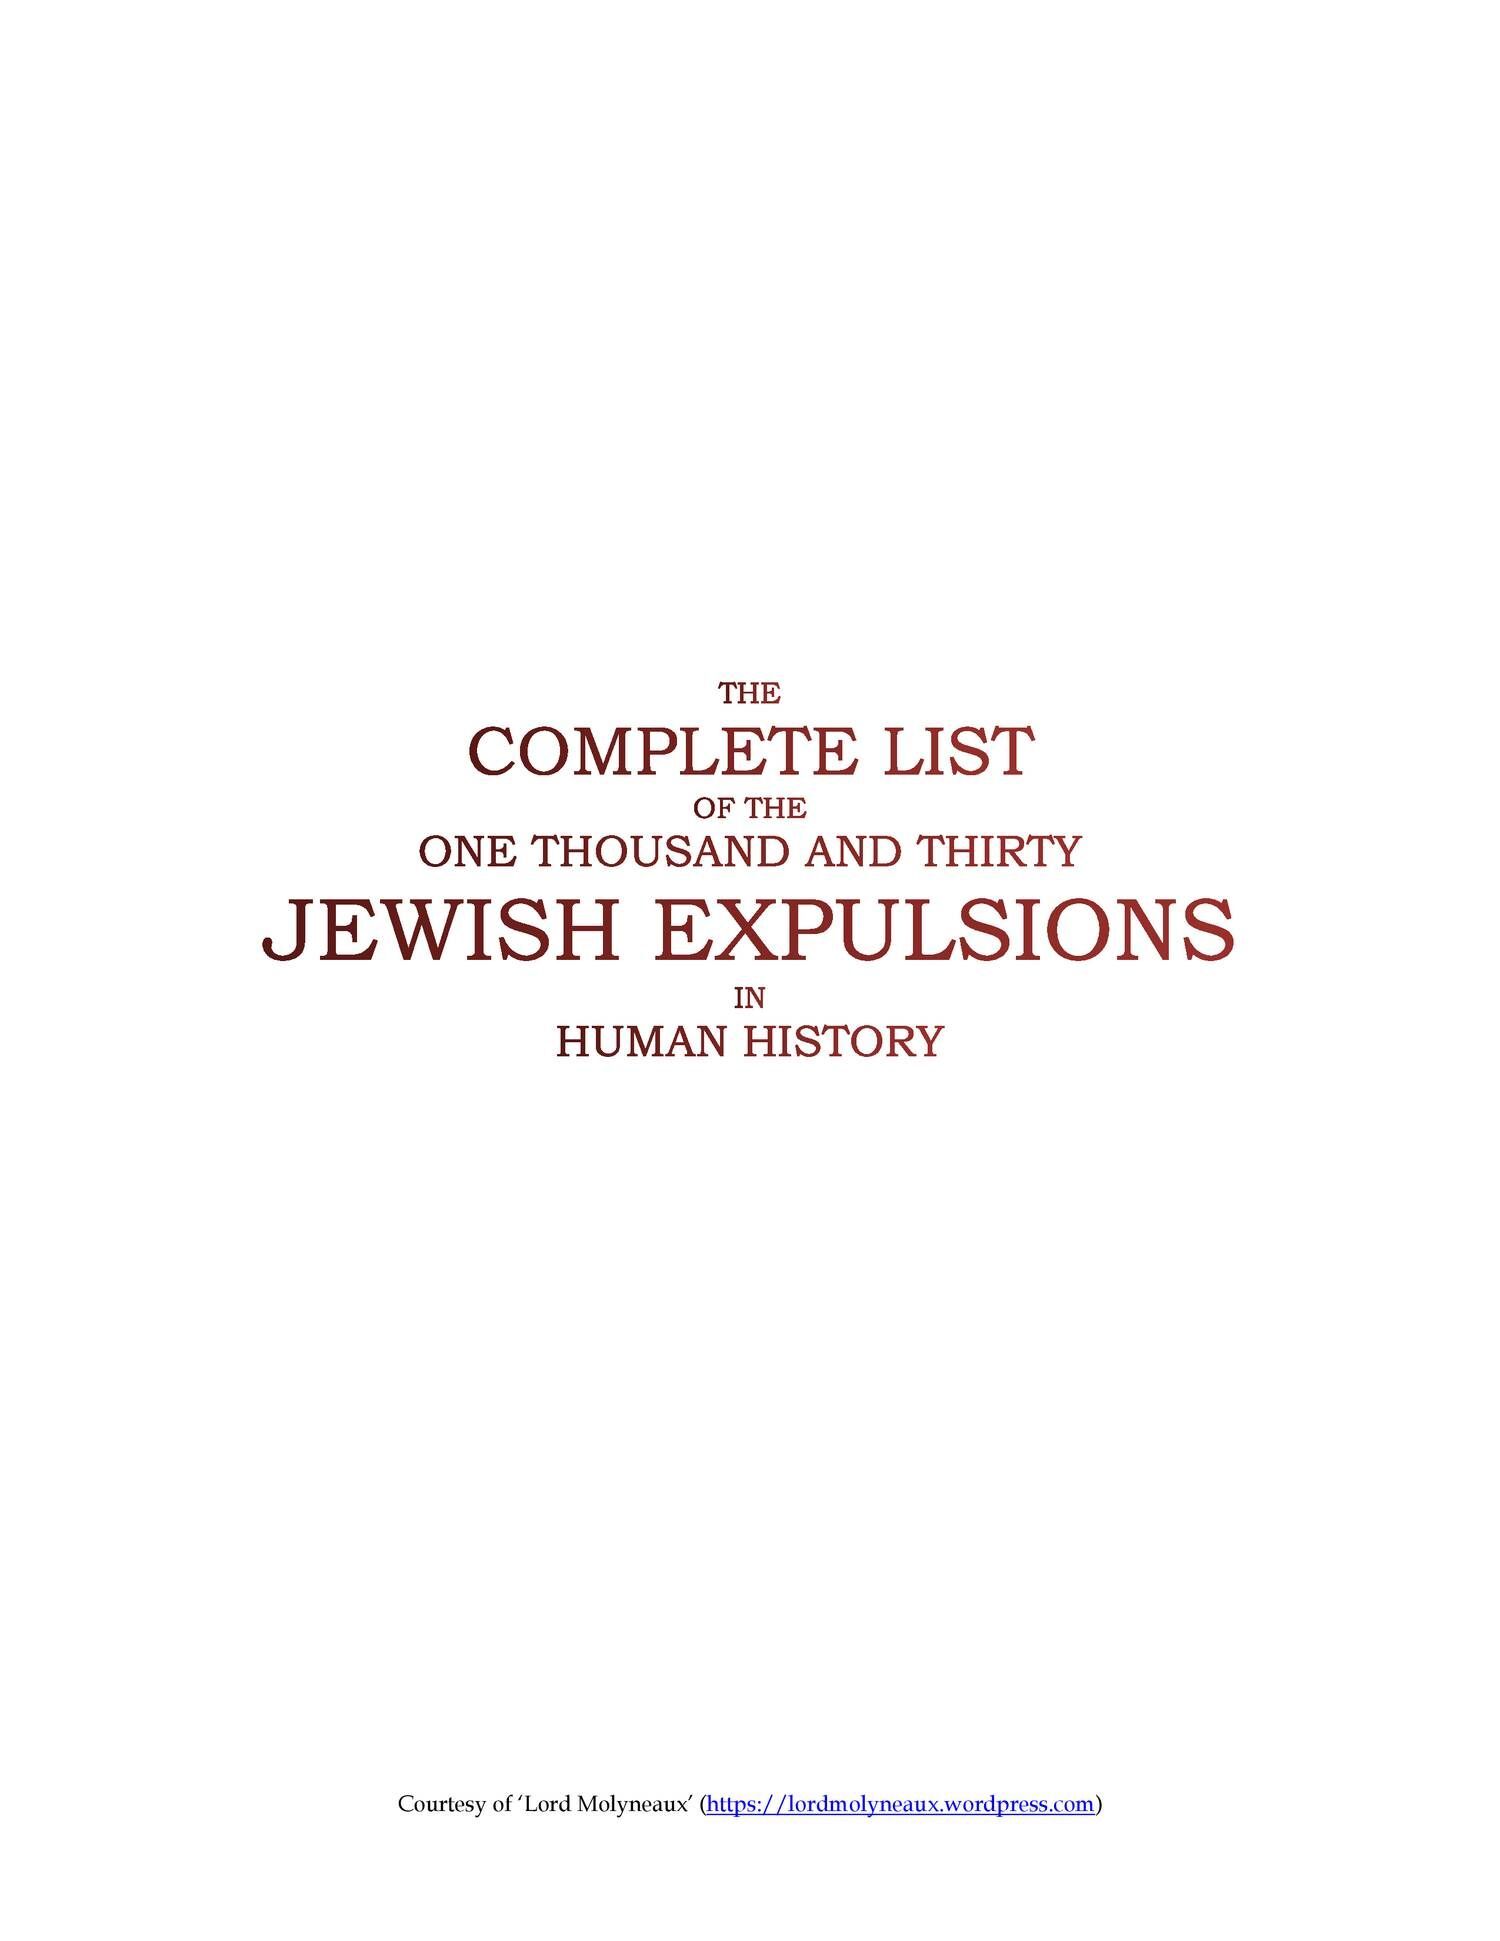 The Complete List of Jewish Expulsions